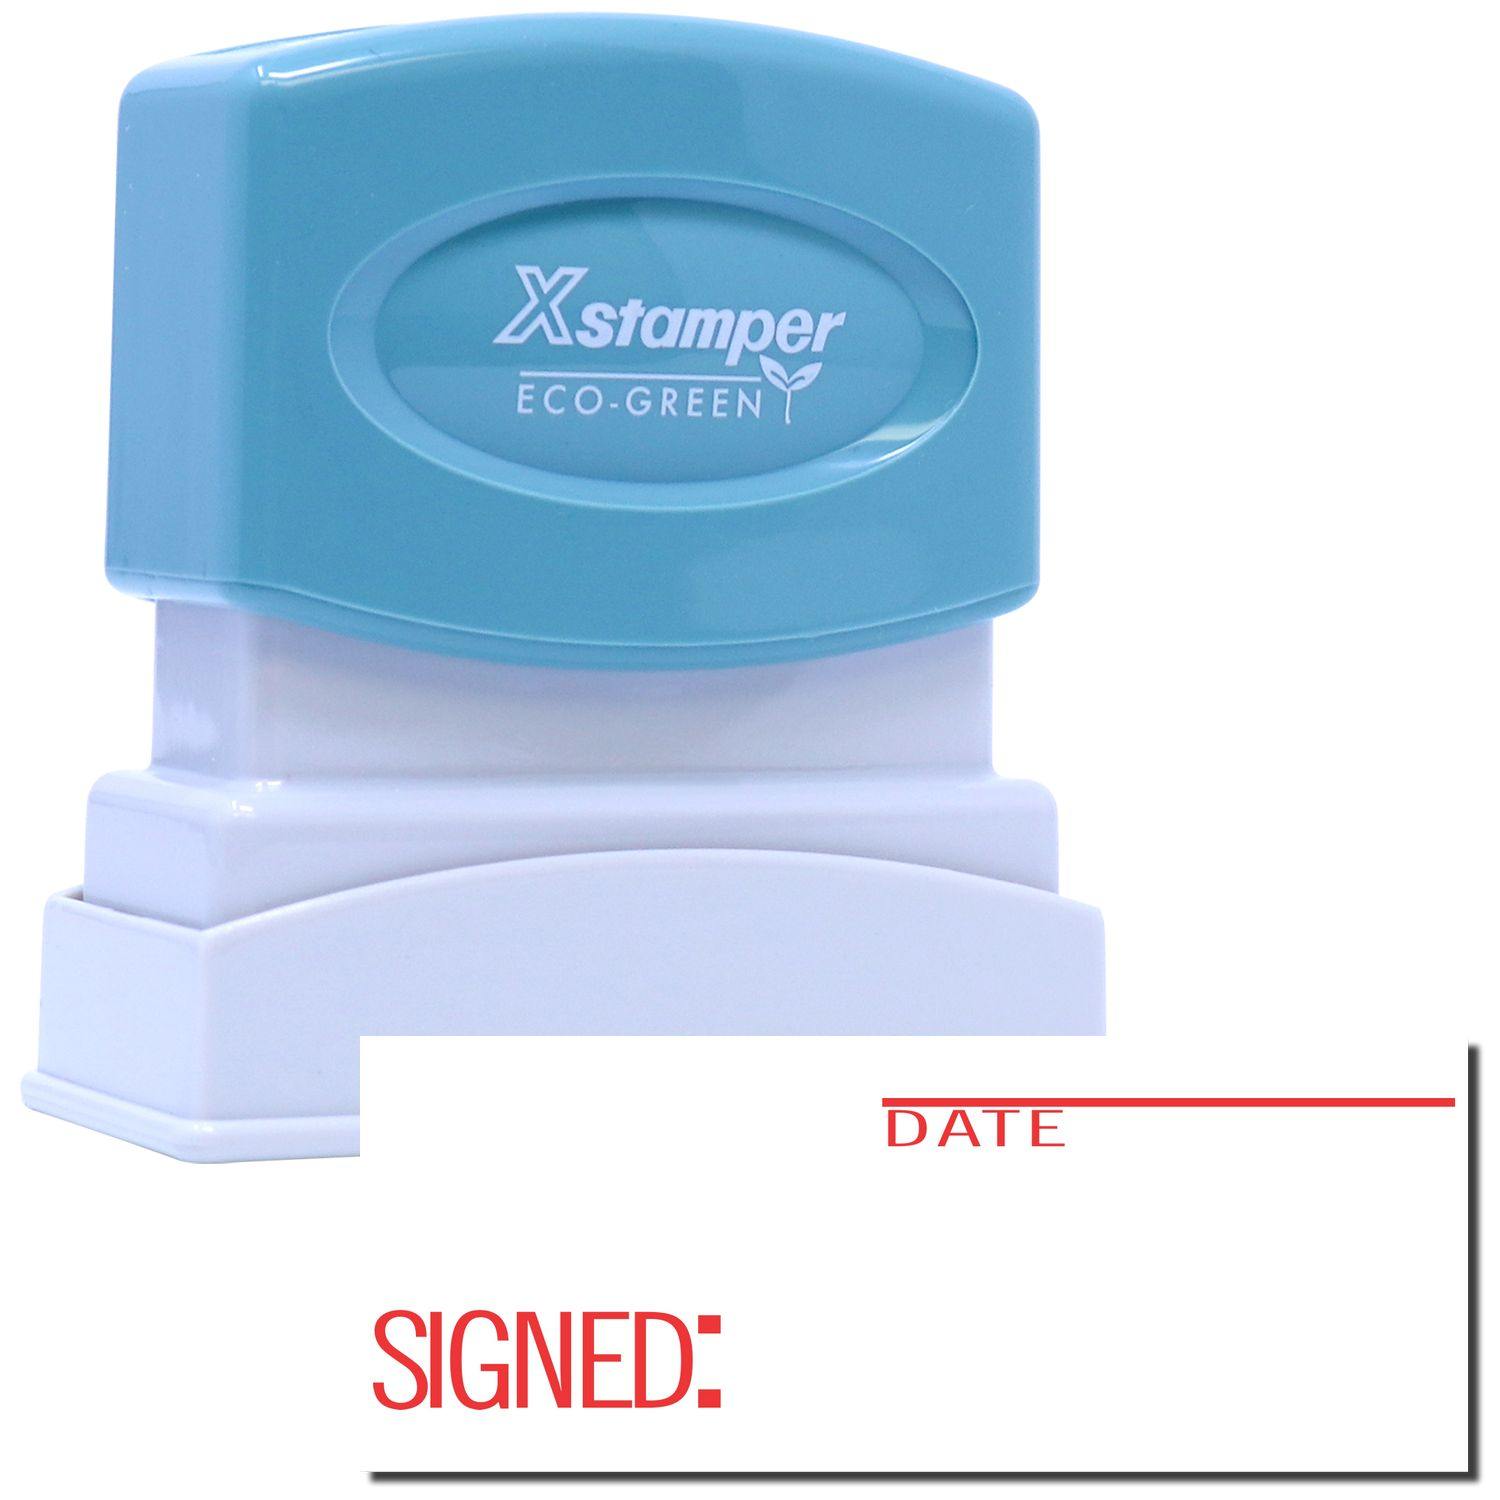 An xstamper stamp with a stamped image showing how the texts "SIGNED:" on the left bottom side and "DATE" with a line above it on the right top side are displayed after stamping. 